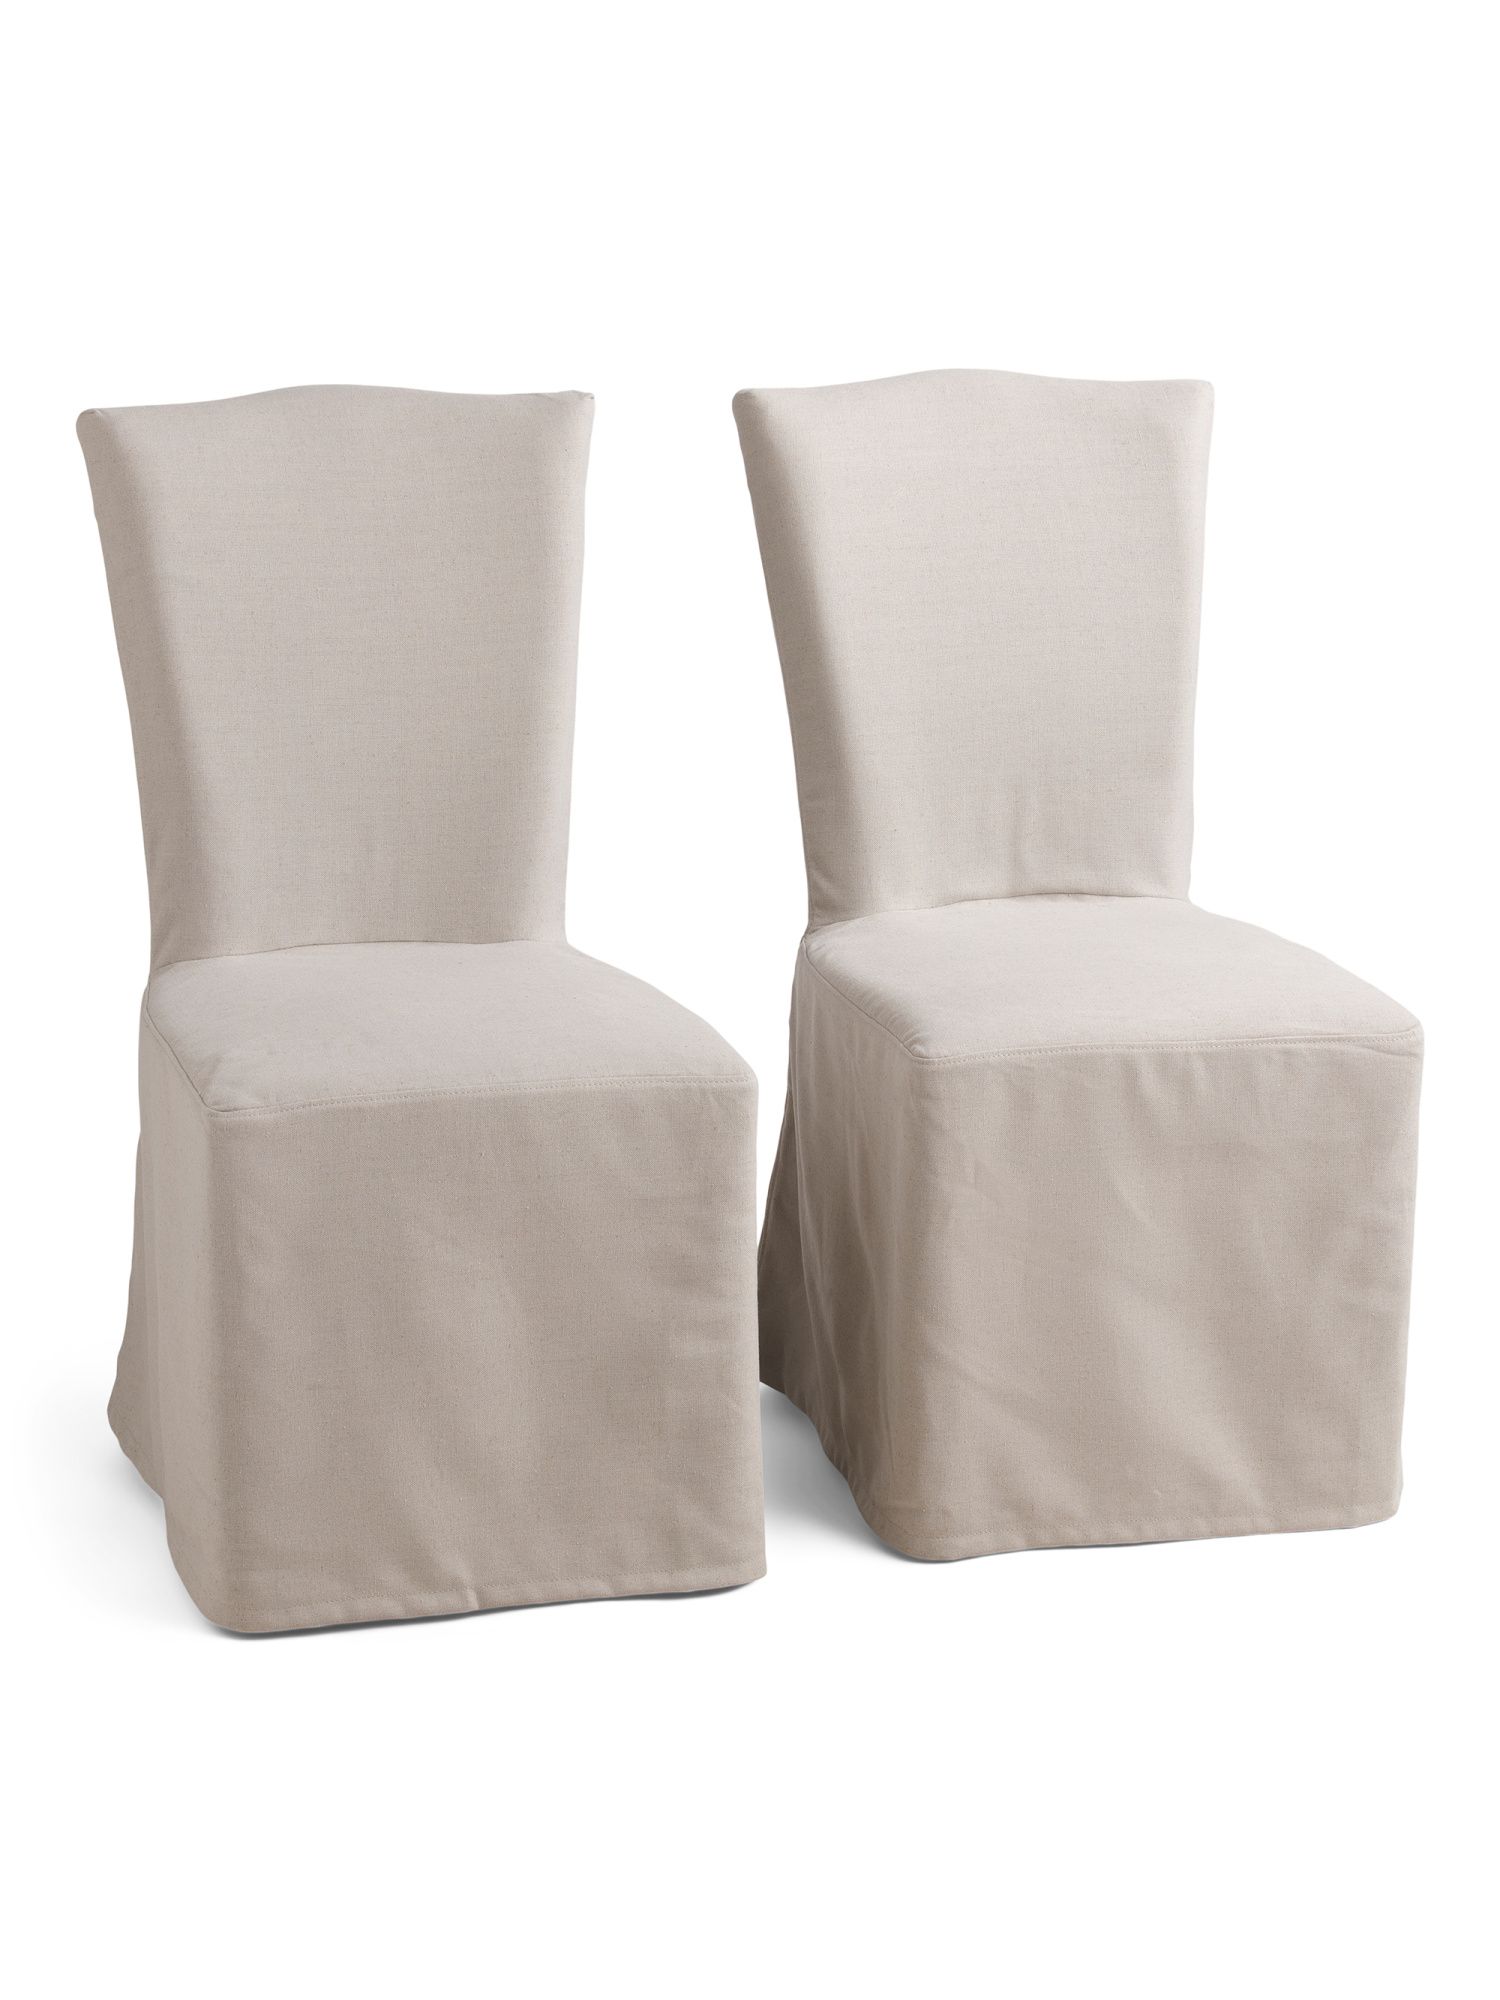 2pk Melrose Linen And Cotton Blend Upholstered Dining Chairs | Kitchen & Dining Room | Marshalls | Marshalls